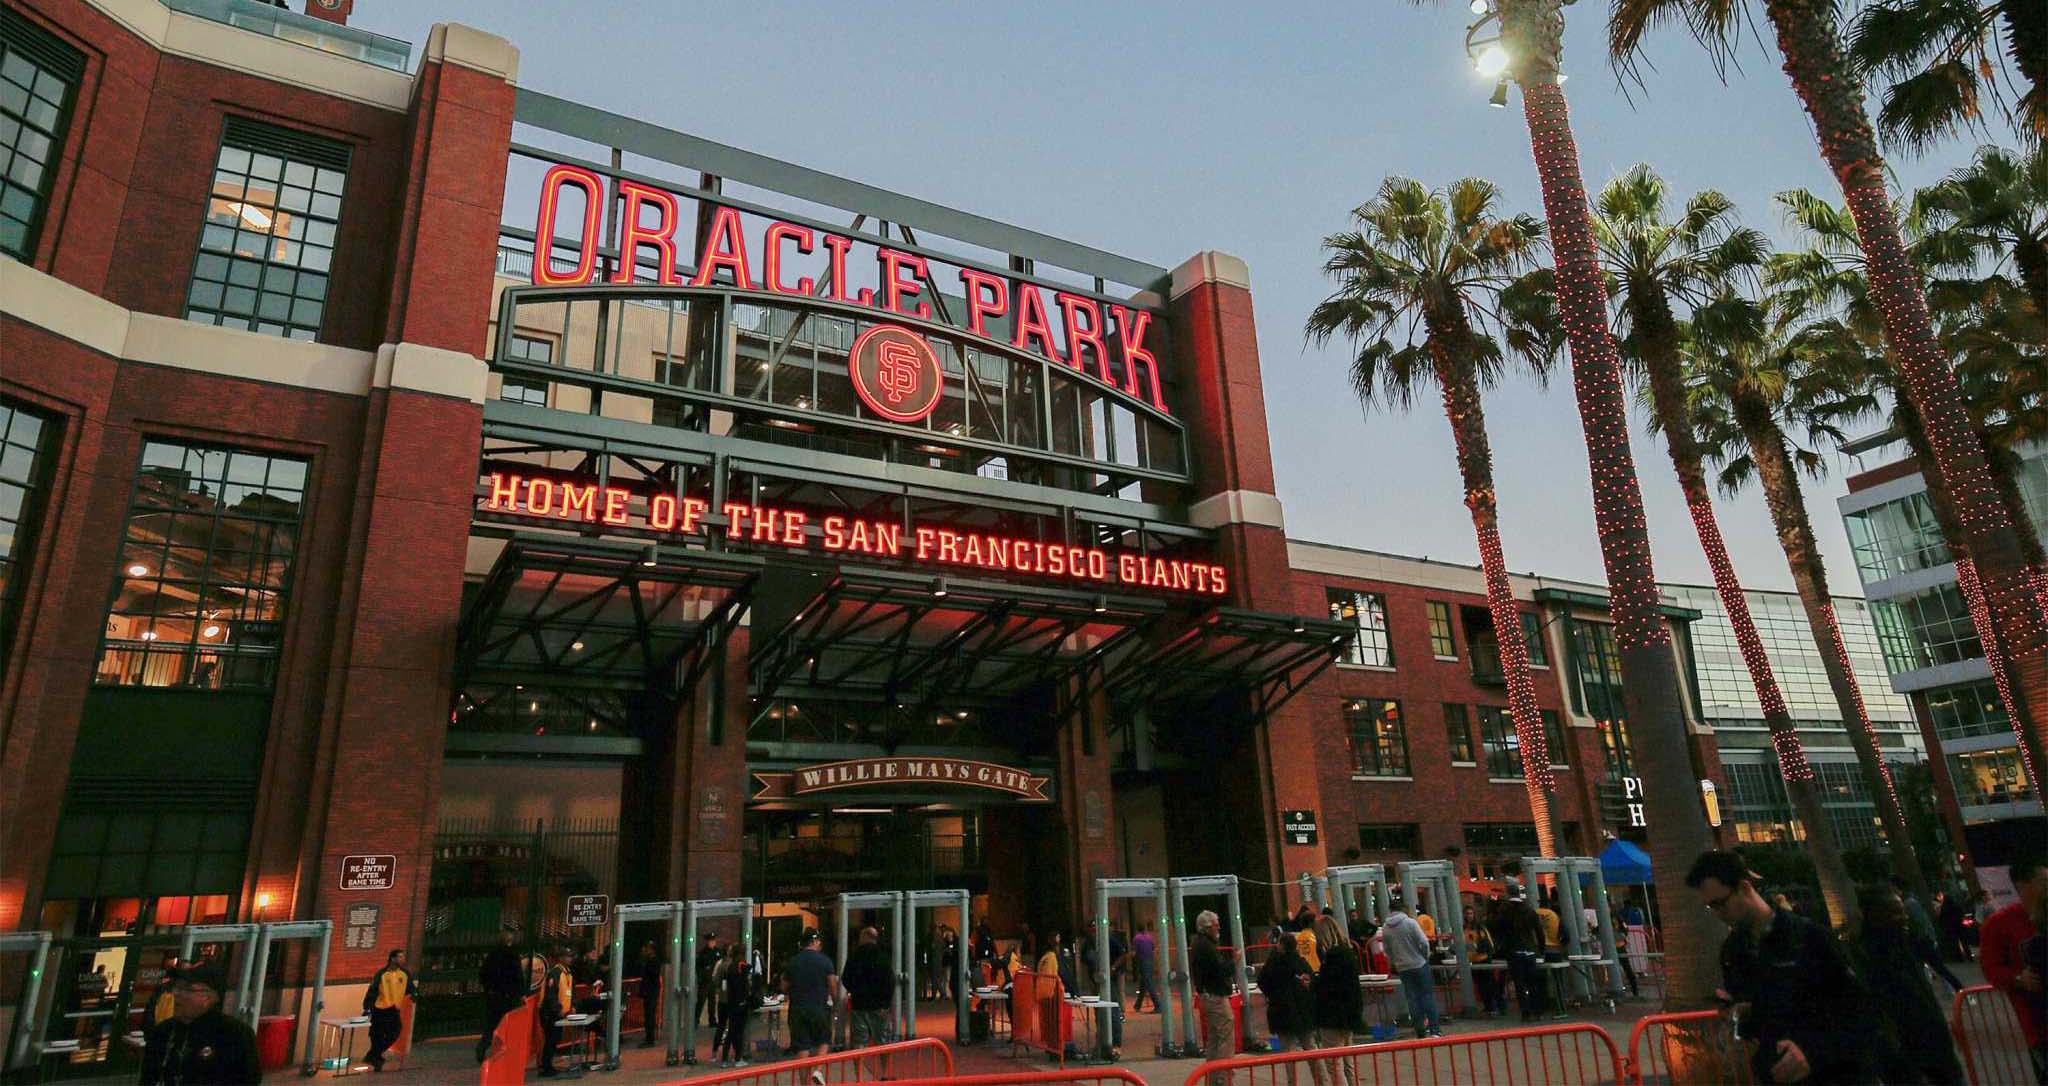 The Giants on Thursday Jan. 9, 2019, will announce a 20-year agreement with the Oracle, a Redwood Shores-based technology company to affix its name to their waterfront ballpark in San Francisco.